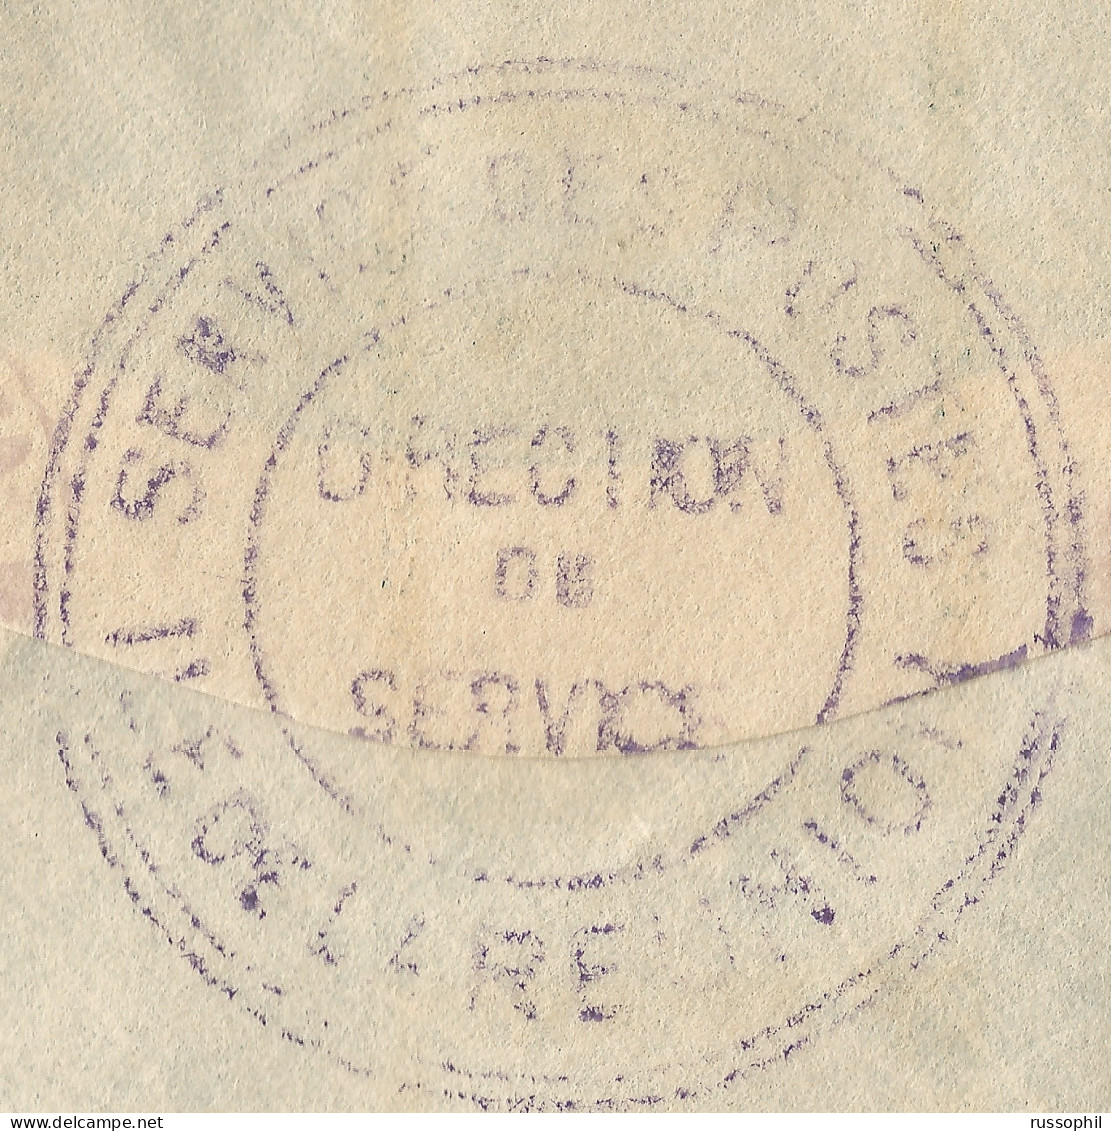 REUNION - 30 FR 60 CENT.  4 STAMP FRANKING ON REGISTERED AIR COVER FROM SAINT DENIS TO THE USA - 1945 - Briefe U. Dokumente